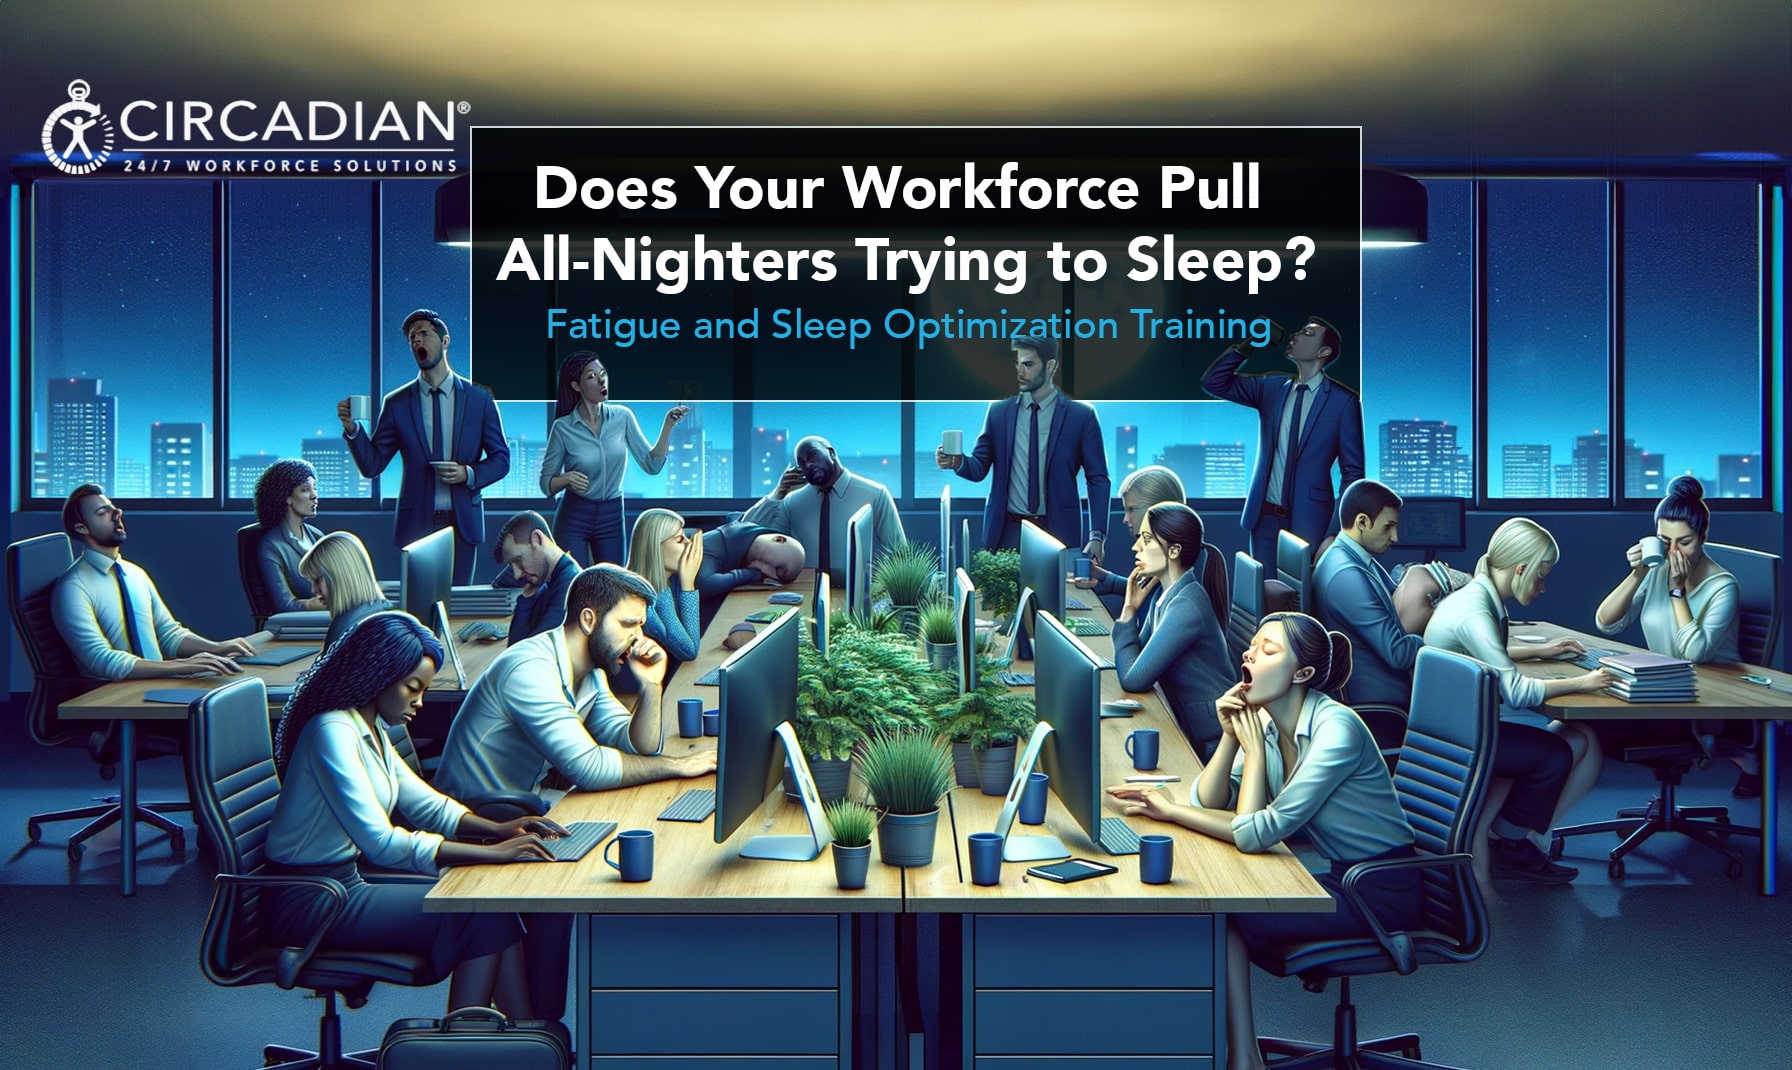 Does Your Workforce Pull All-Nighters Trying to Sleep? Fatigue and Sleep Optimization Training